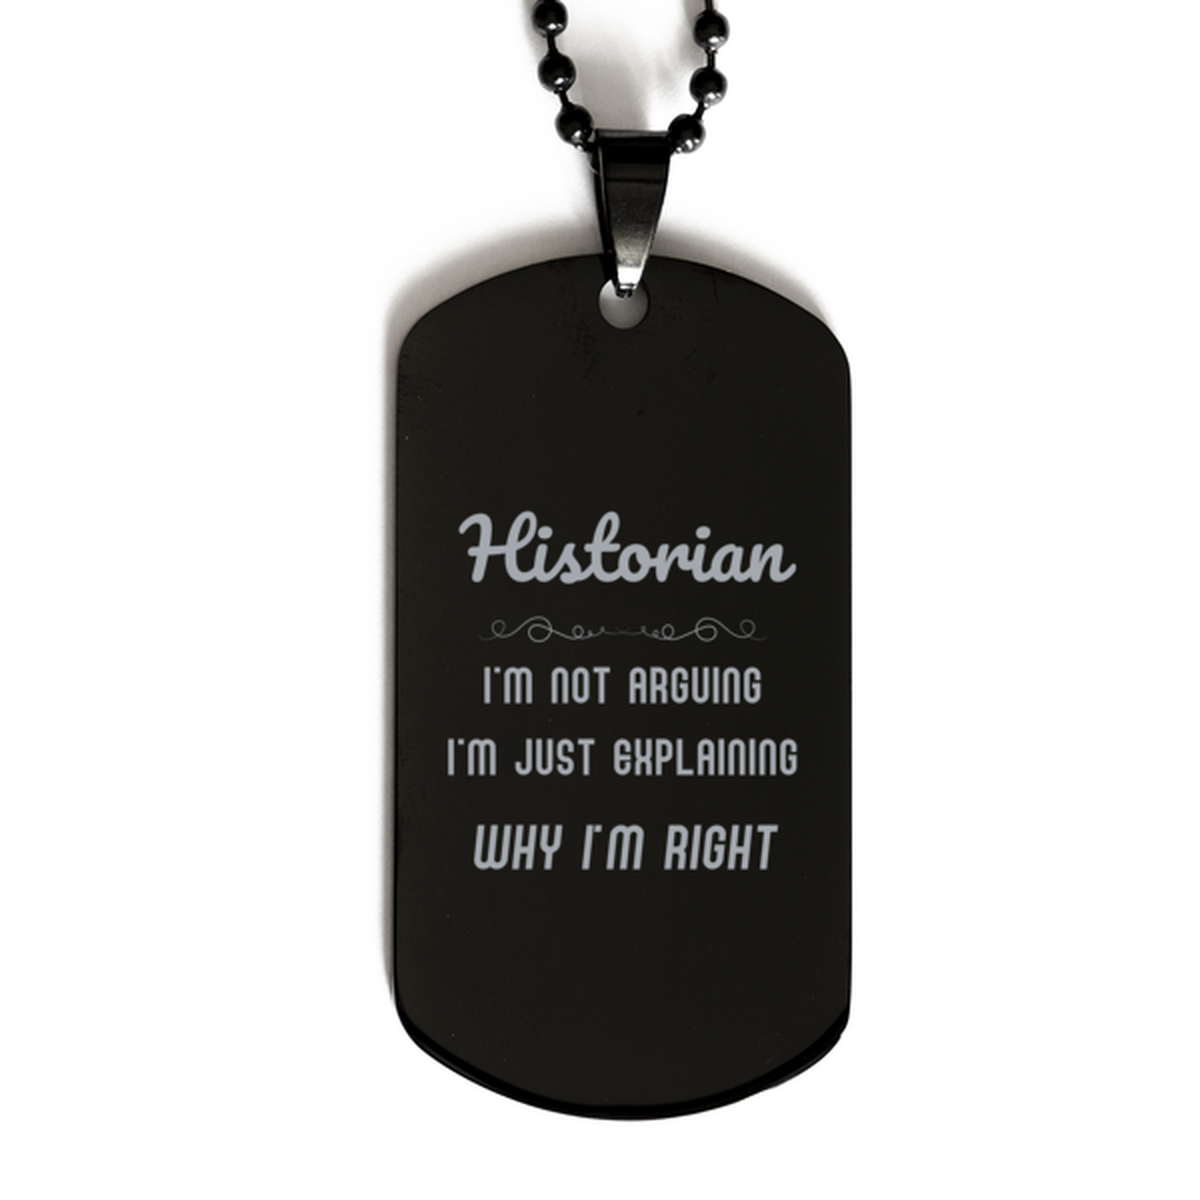 Historian I'm not Arguing. I'm Just Explaining Why I'm RIGHT Black Dog Tag, Funny Saying Quote Historian Gifts For Historian Graduation Birthday Christmas Gifts for Men Women Coworker